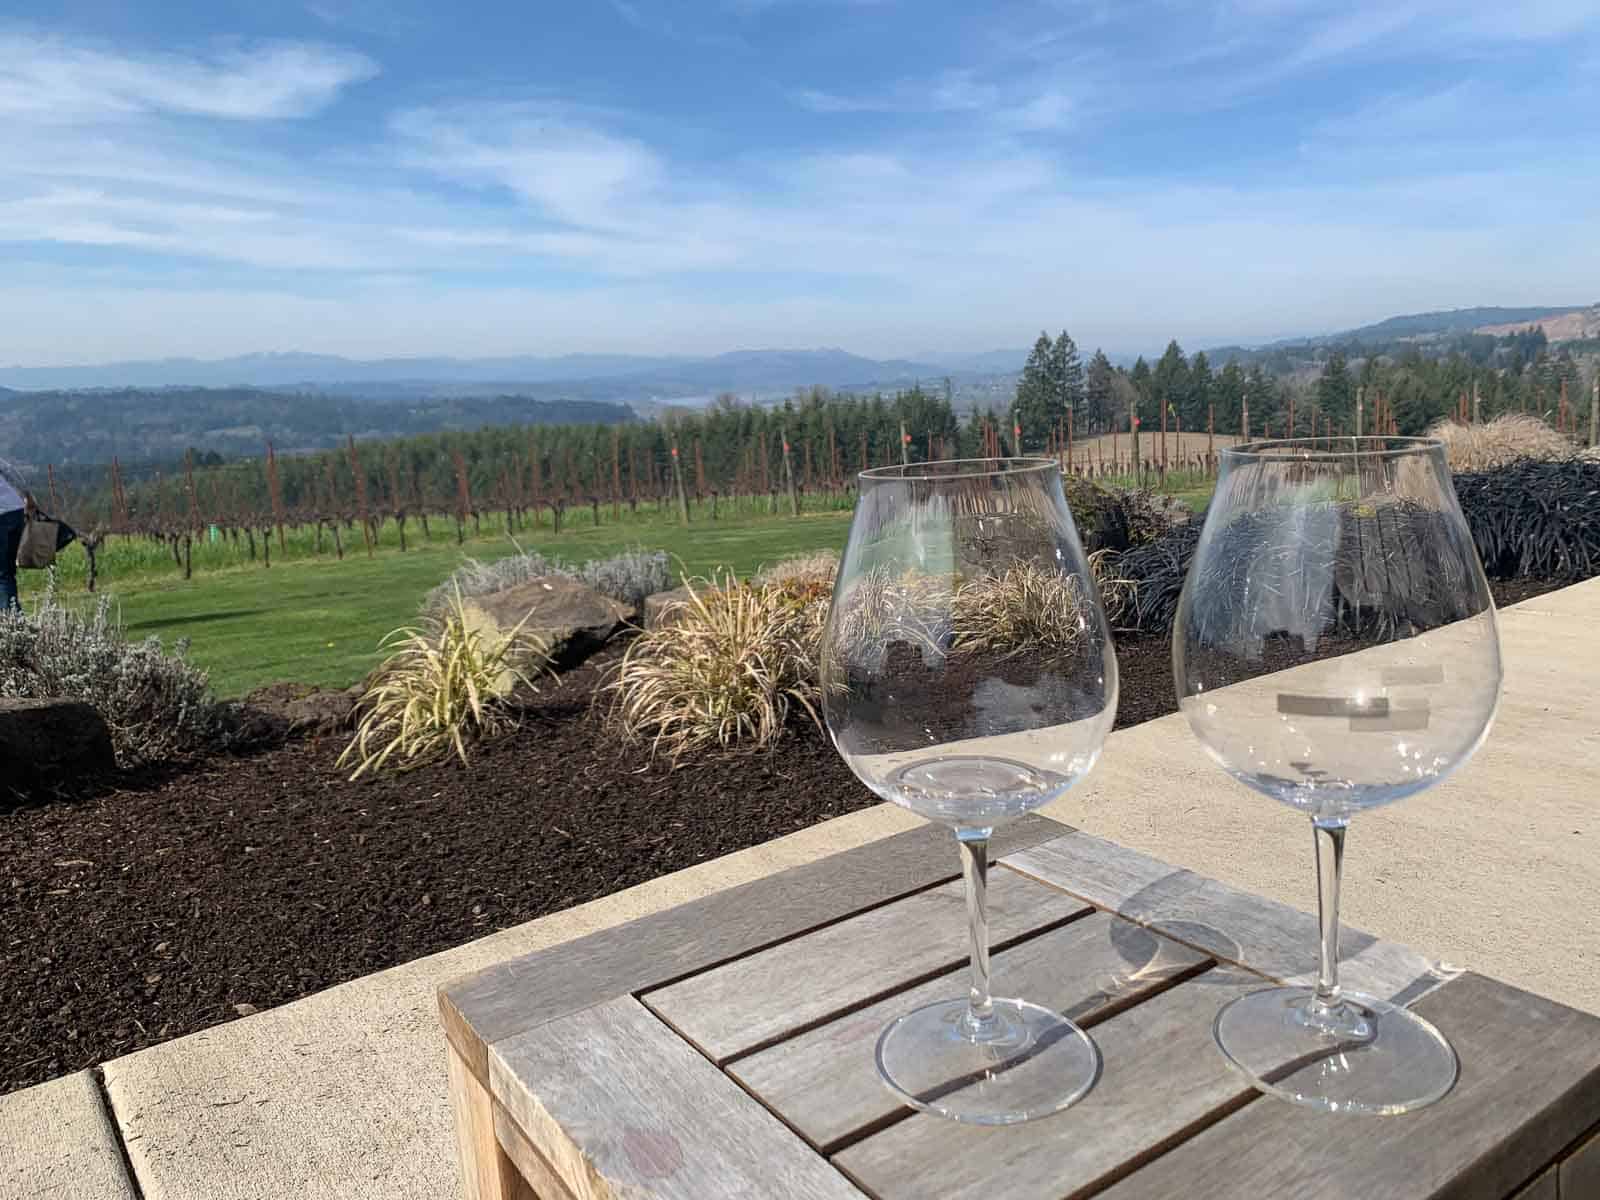 <p>“Oregon wine country is like a well-kept secret. Intimate wineries, stunning landscapes, and wines that tell stories—every sip is an adventure. It’s like discovering Europe’s vineyard charm in the USA. A delightful journey for the palate and soul.”</p><p><strong><strong>Read more</strong>: </strong><a href="https://fooddrinklife.com/oregon-wine-country-at-boutique-wineries/?utm_source=msn&utm_medium=page&utm_campaign=msn">Discover the Magic of Oregon Wine Country at 7 Boutique Wineries</a></p>